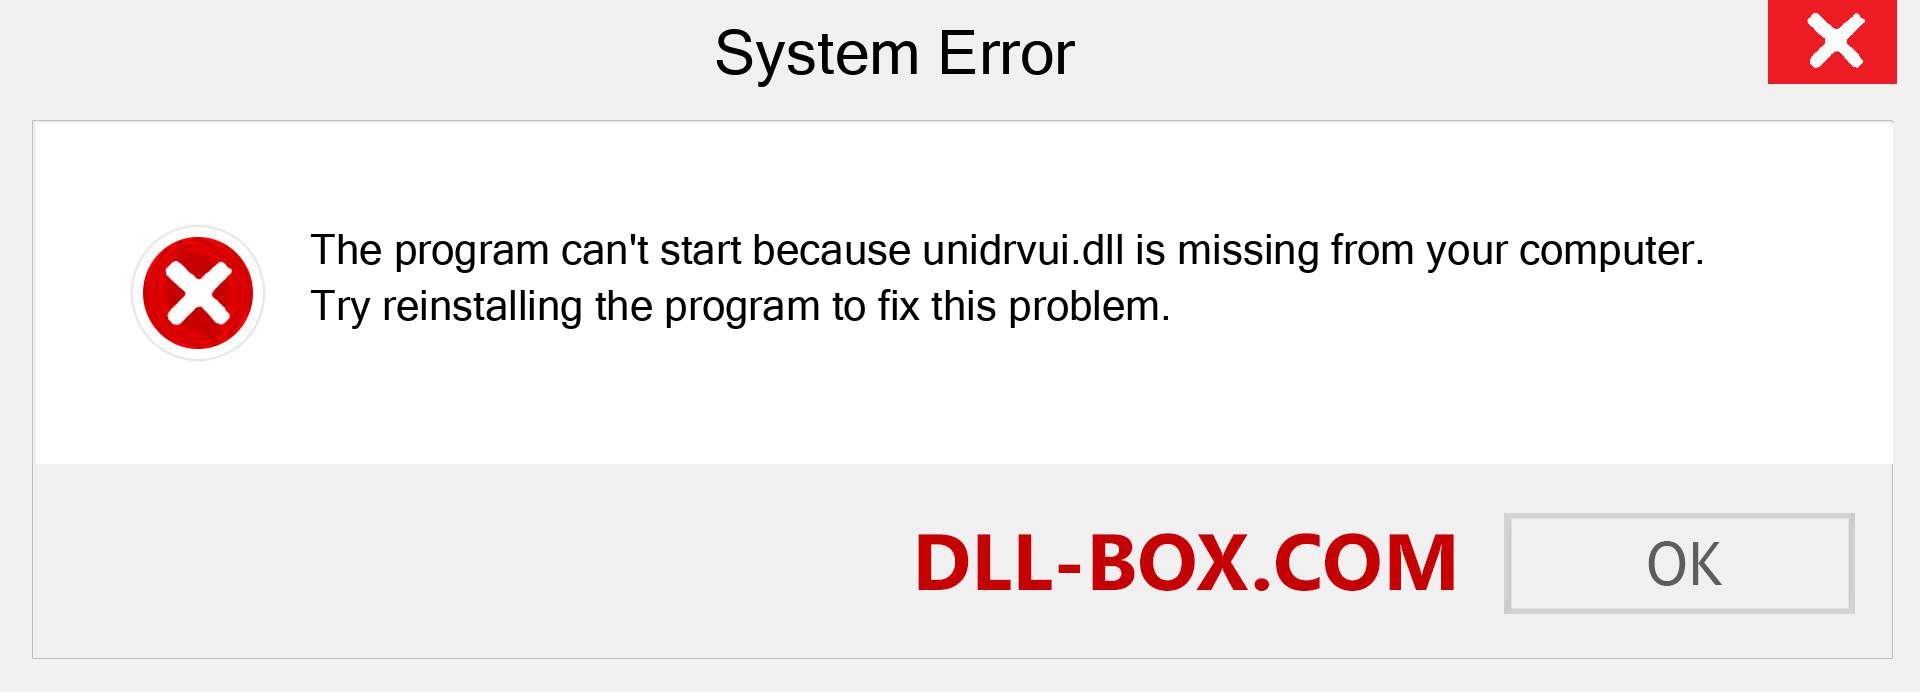  unidrvui.dll file is missing?. Download for Windows 7, 8, 10 - Fix  unidrvui dll Missing Error on Windows, photos, images